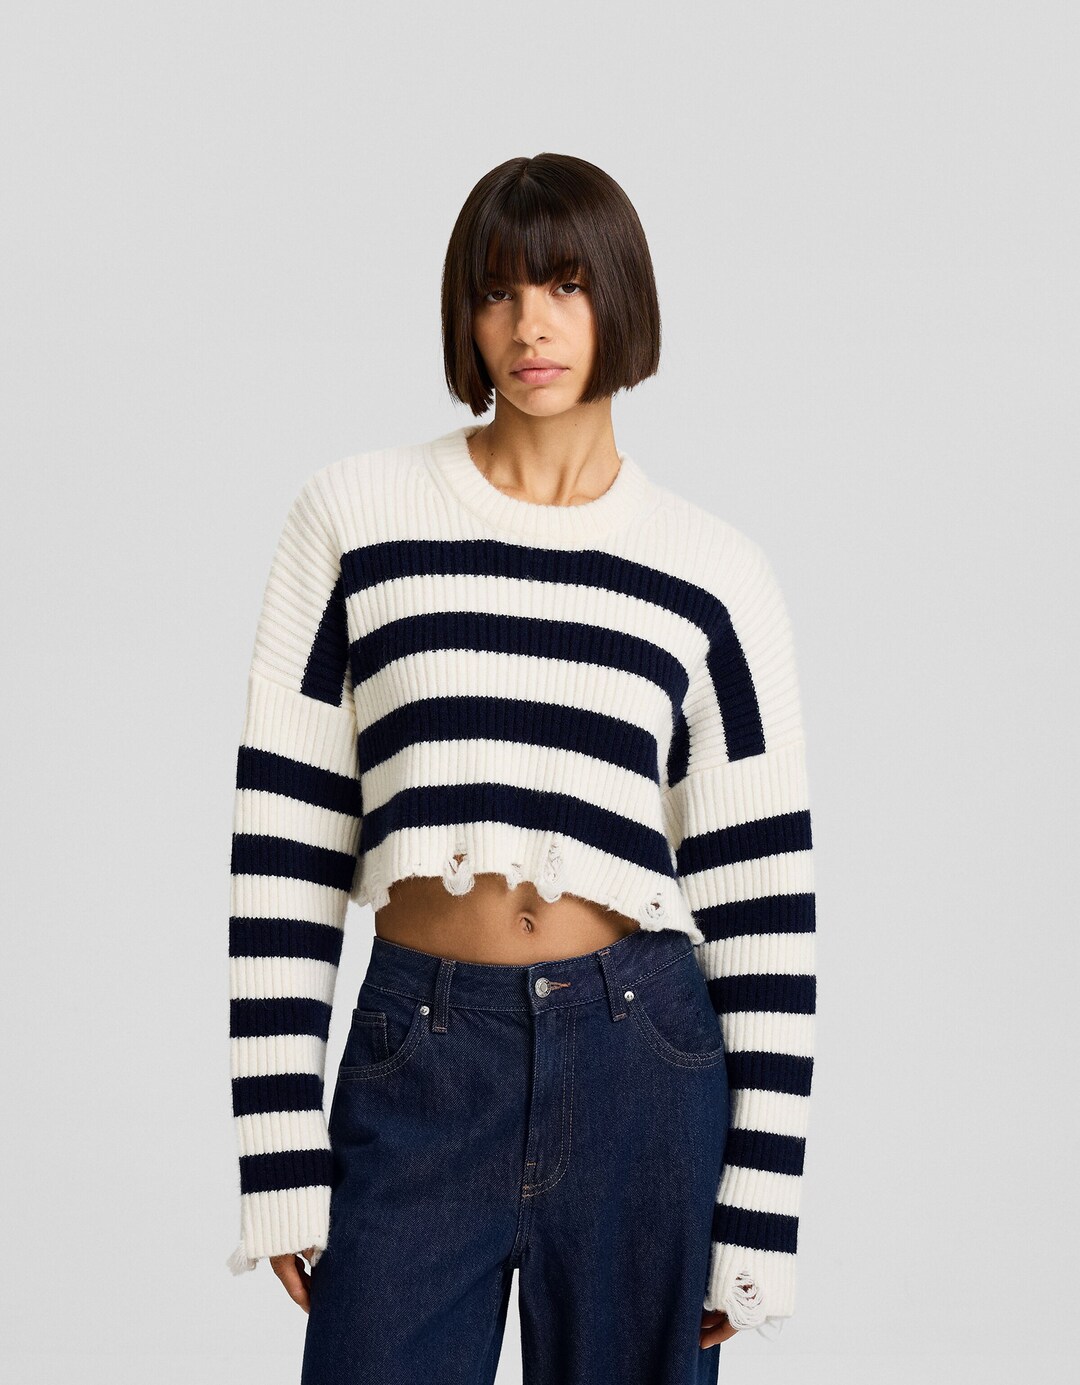 Striped sweater with rips